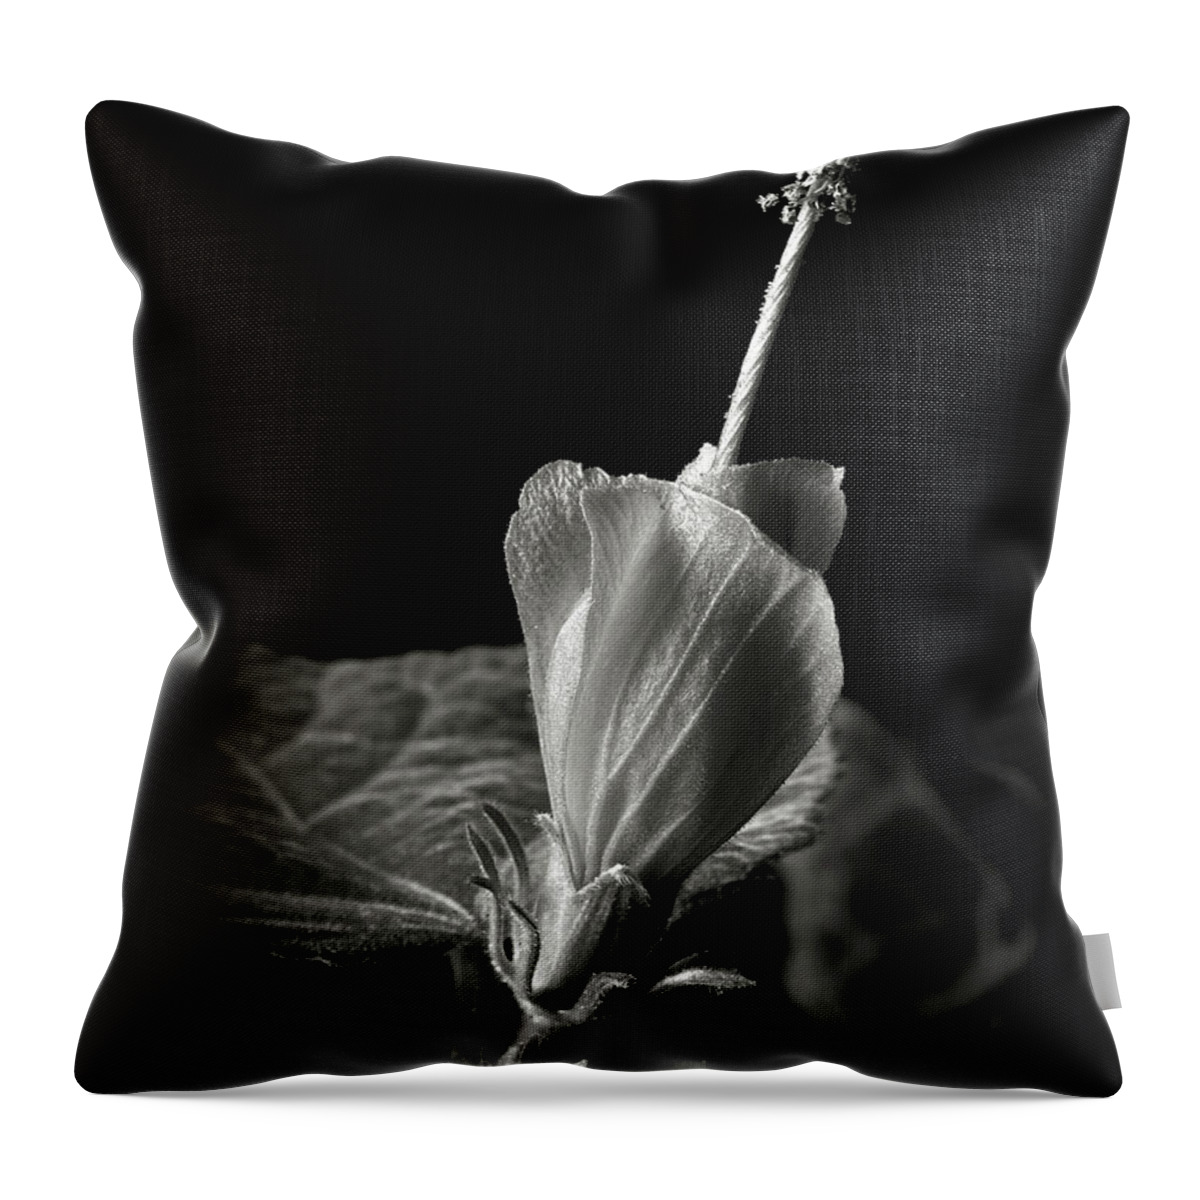 Flower Throw Pillow featuring the photograph Turk's Cap in Black and White by Endre Balogh